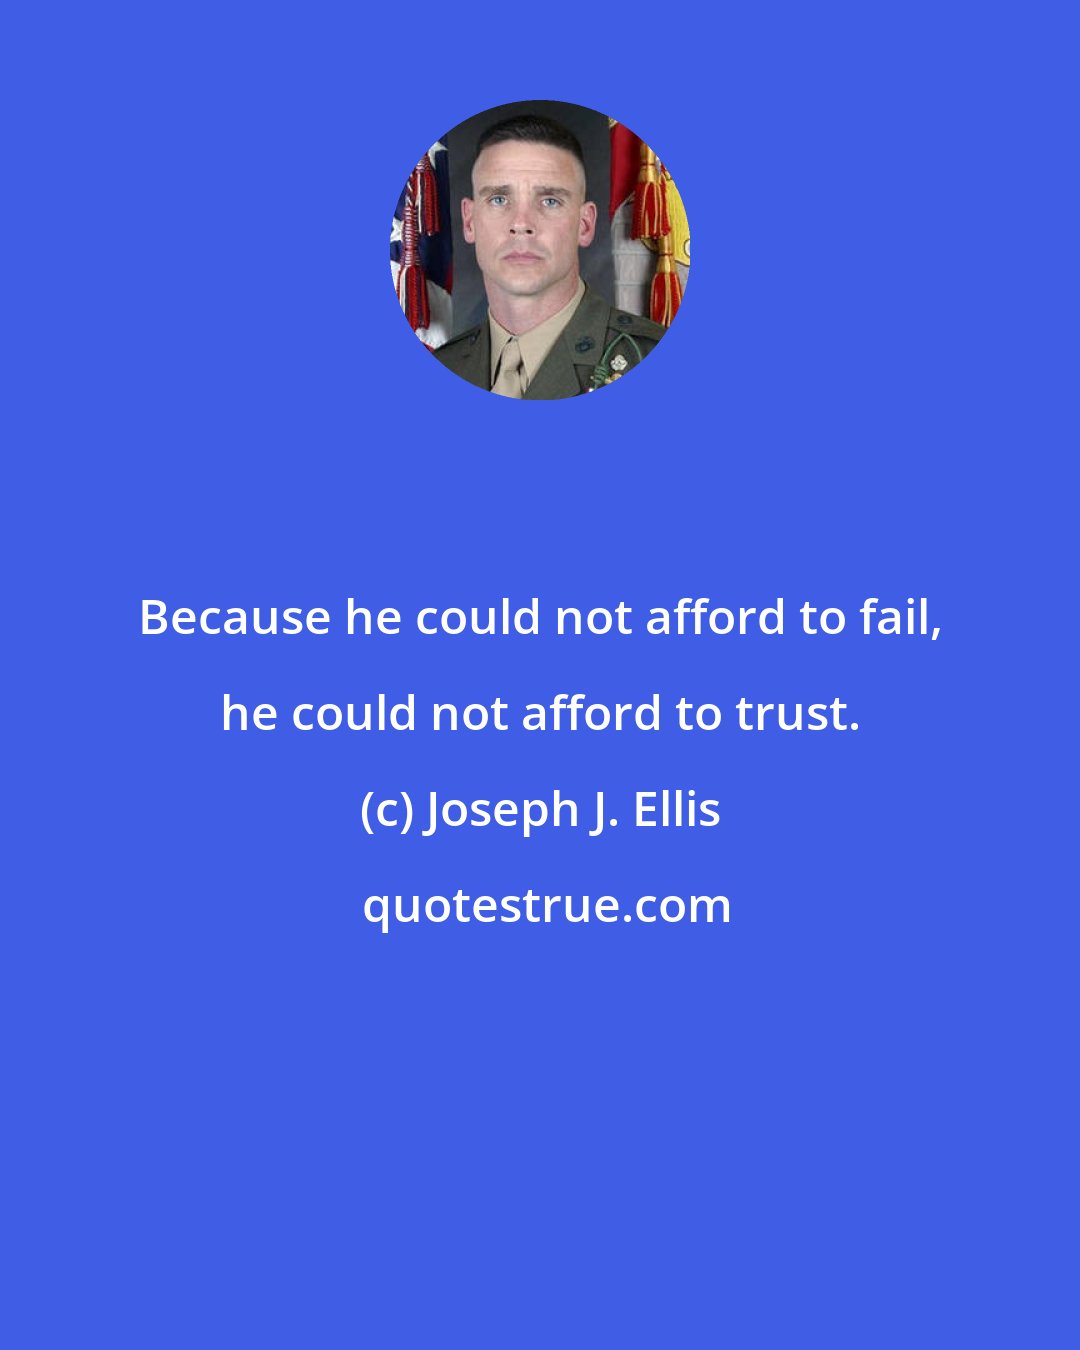 Joseph J. Ellis: Because he could not afford to fail, he could not afford to trust.